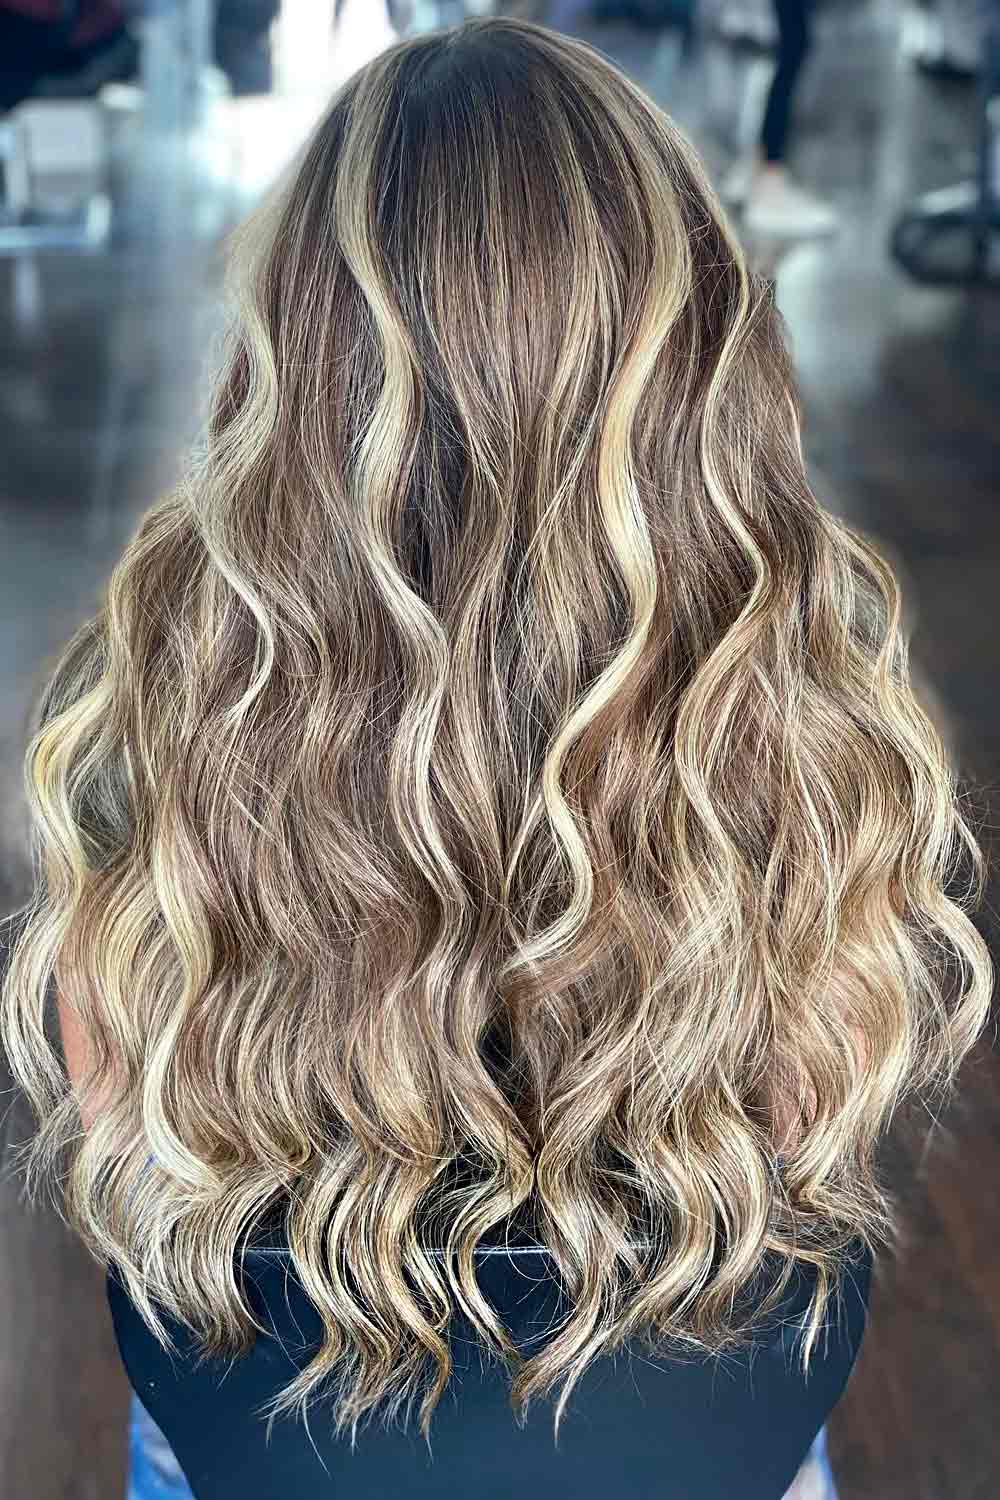 Dirty Blonde Hairstyles With Blonde Highlights #dirtyblondehair #dirtyblonde #blondehair #blonde